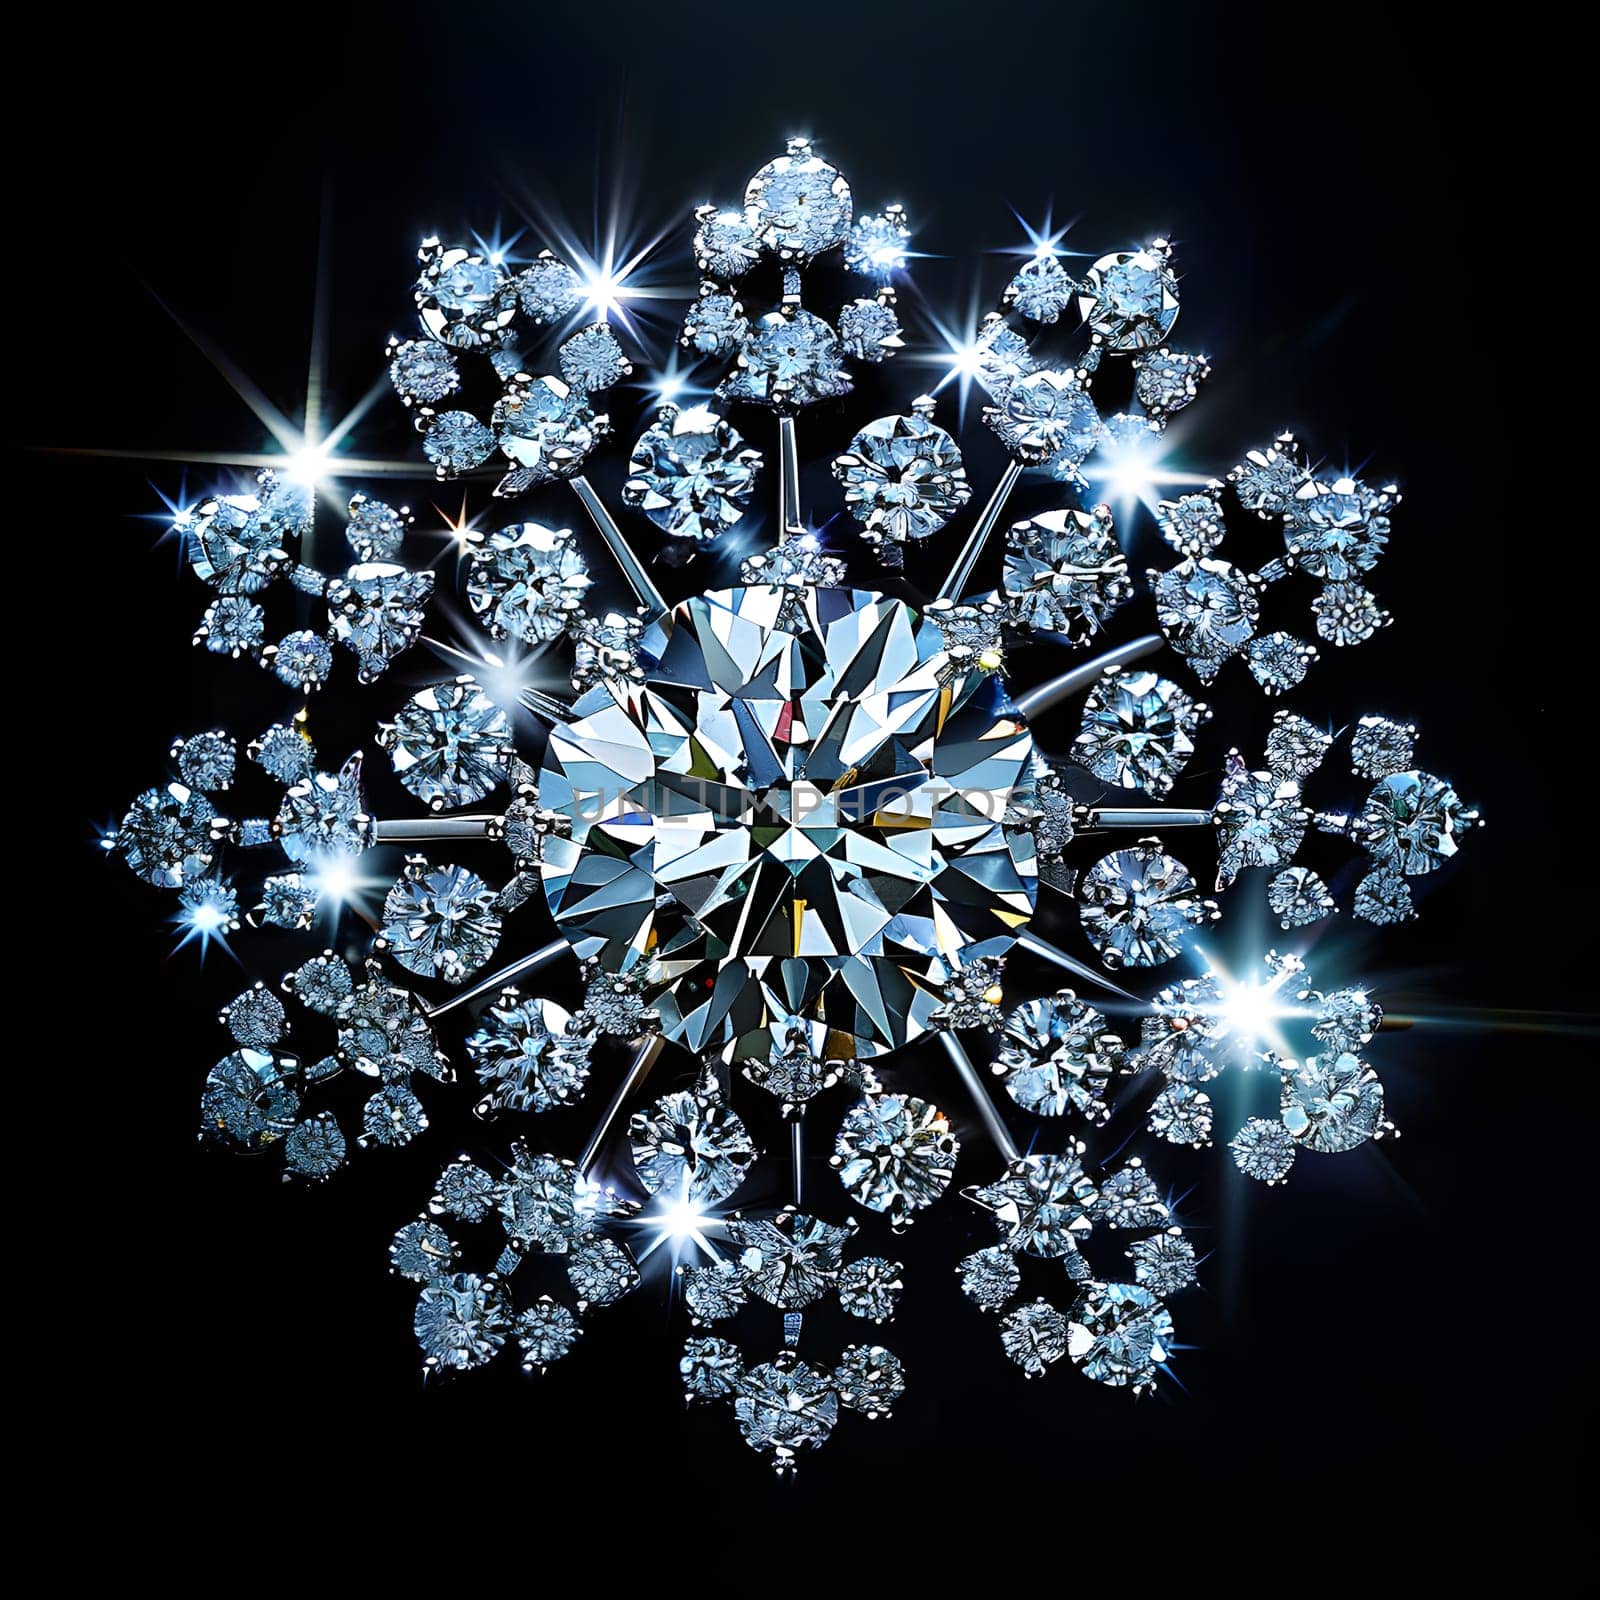 A diamond snowflake petal pattern in electric blue on a black background, resembling a ceiling fixture art with symmetry and darkness, inspired by a flowering plant, creating an event of beauty